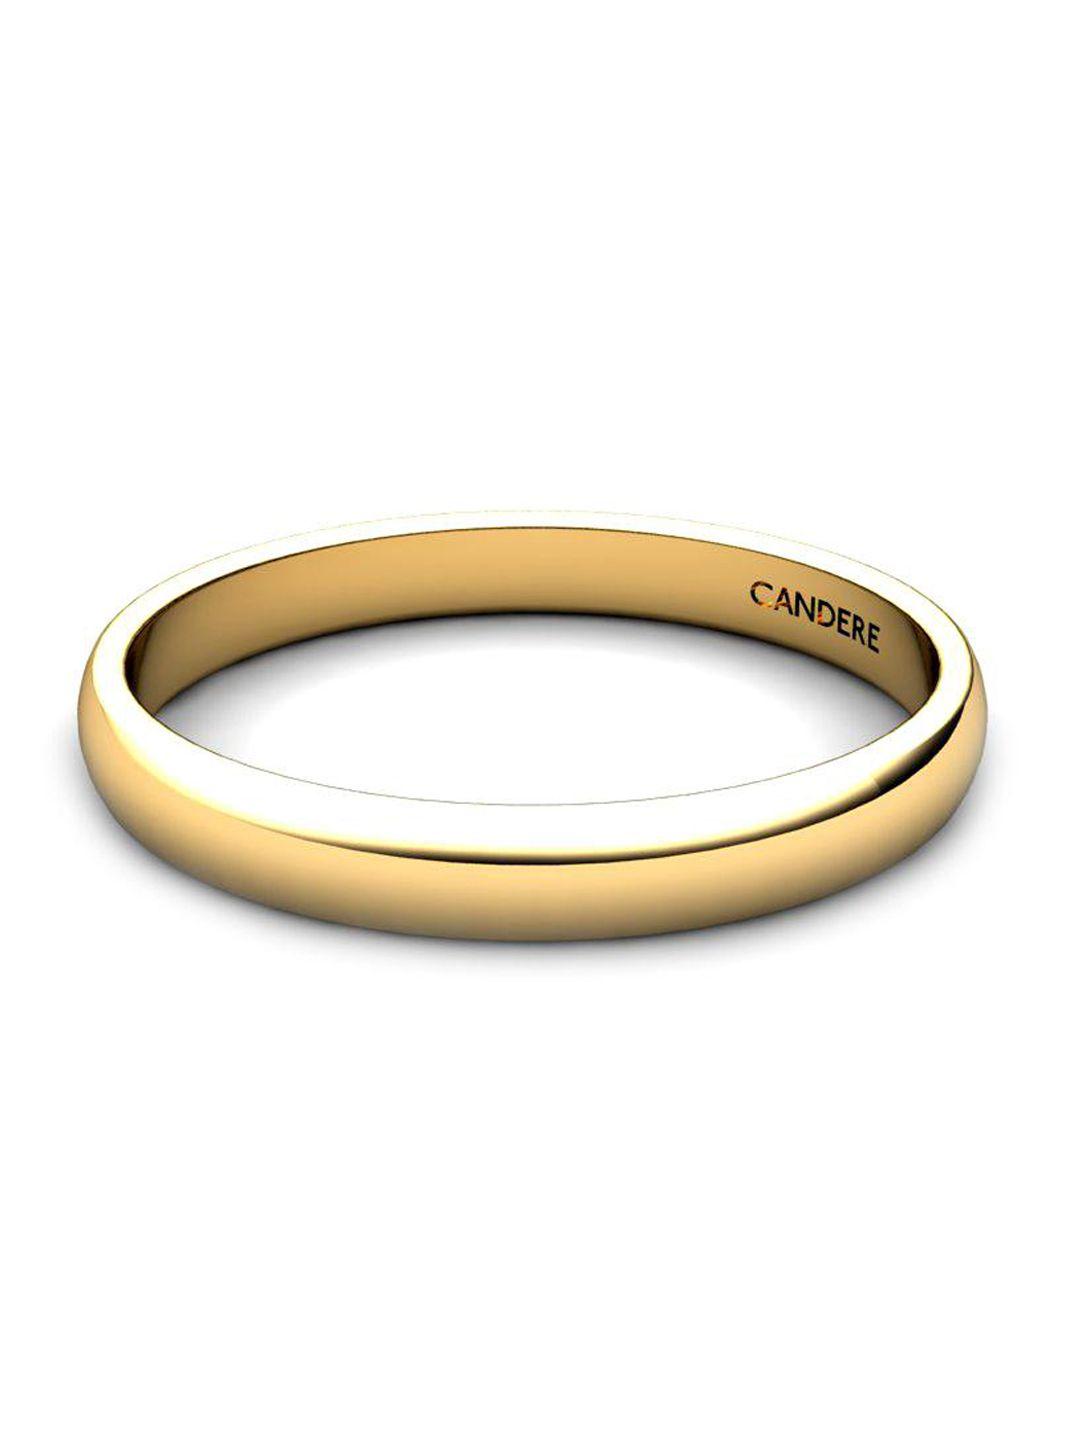 CANDERE A KALYAN JEWELLERS COMPANY 18KT Gold Ring-2.95gm